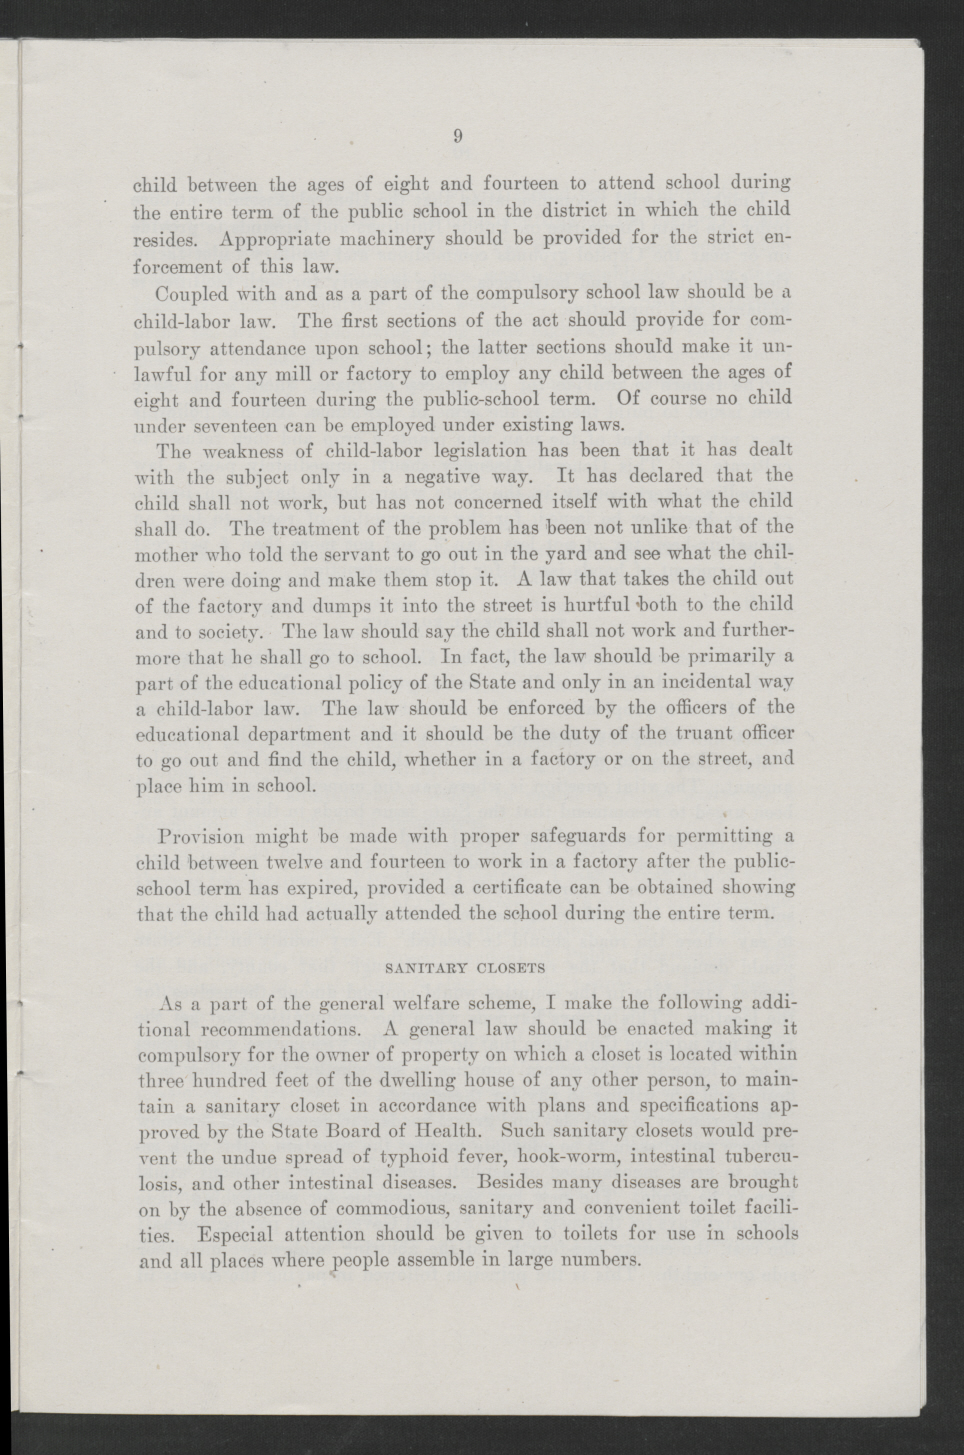 Biennial Message of Governor Thomas W. Bickett to the General Assembly, January 9, 1919, page 7